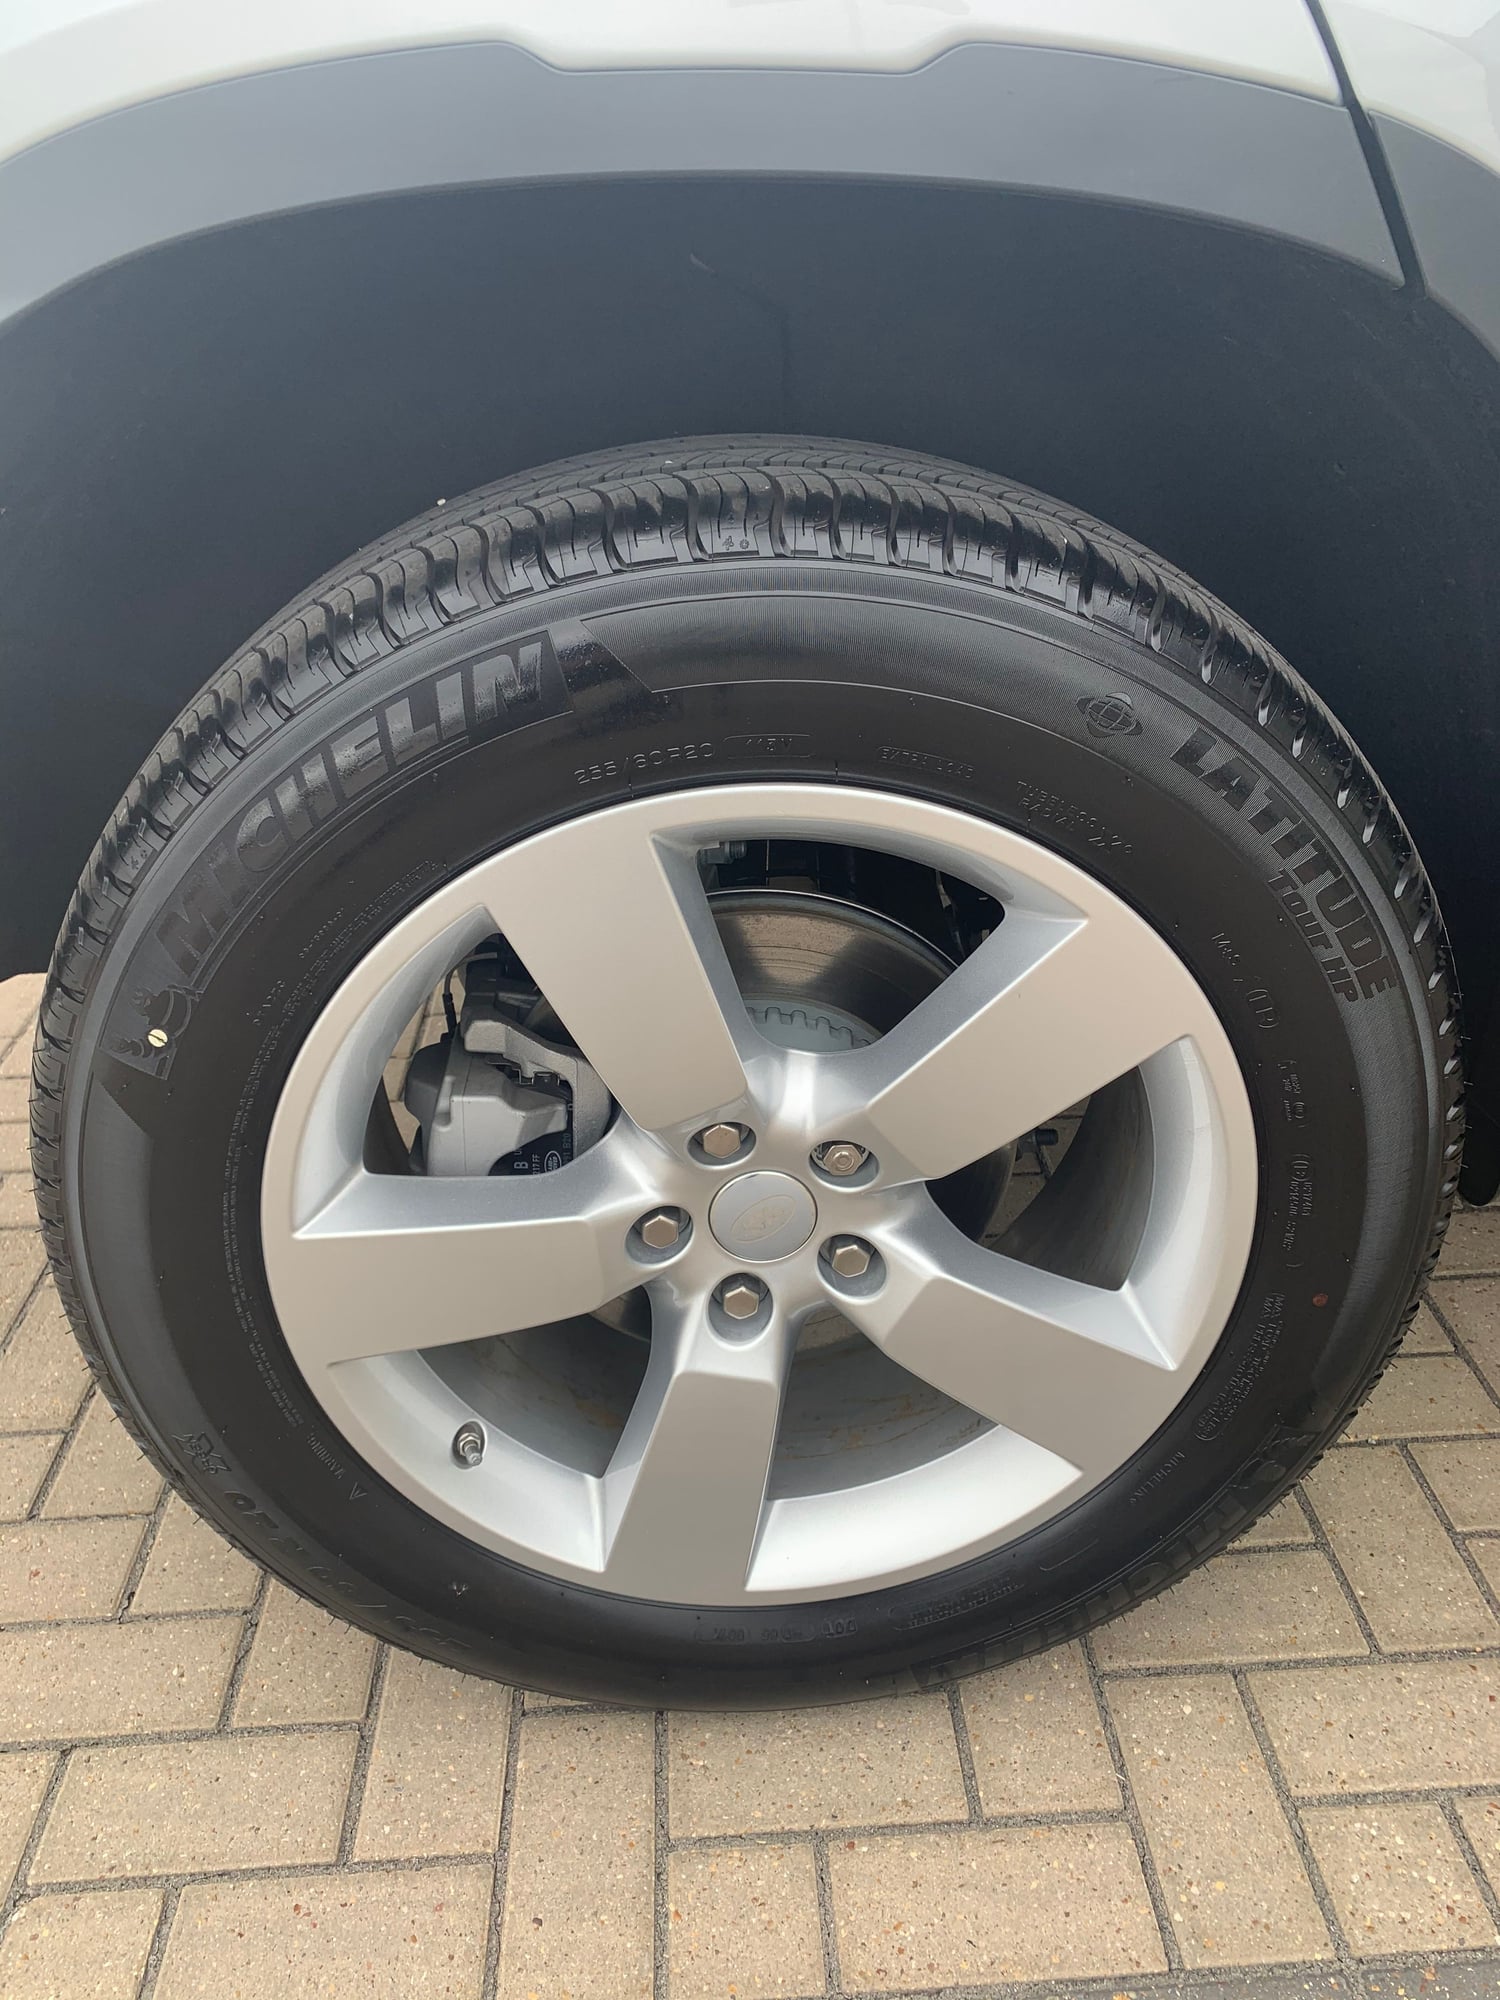 Wheels and Tires/Axles - Like New Defender Wheels and Tires - Used - 2020 to 2021 Land Rover Defender - Oklahoma City, OK 73116, United States